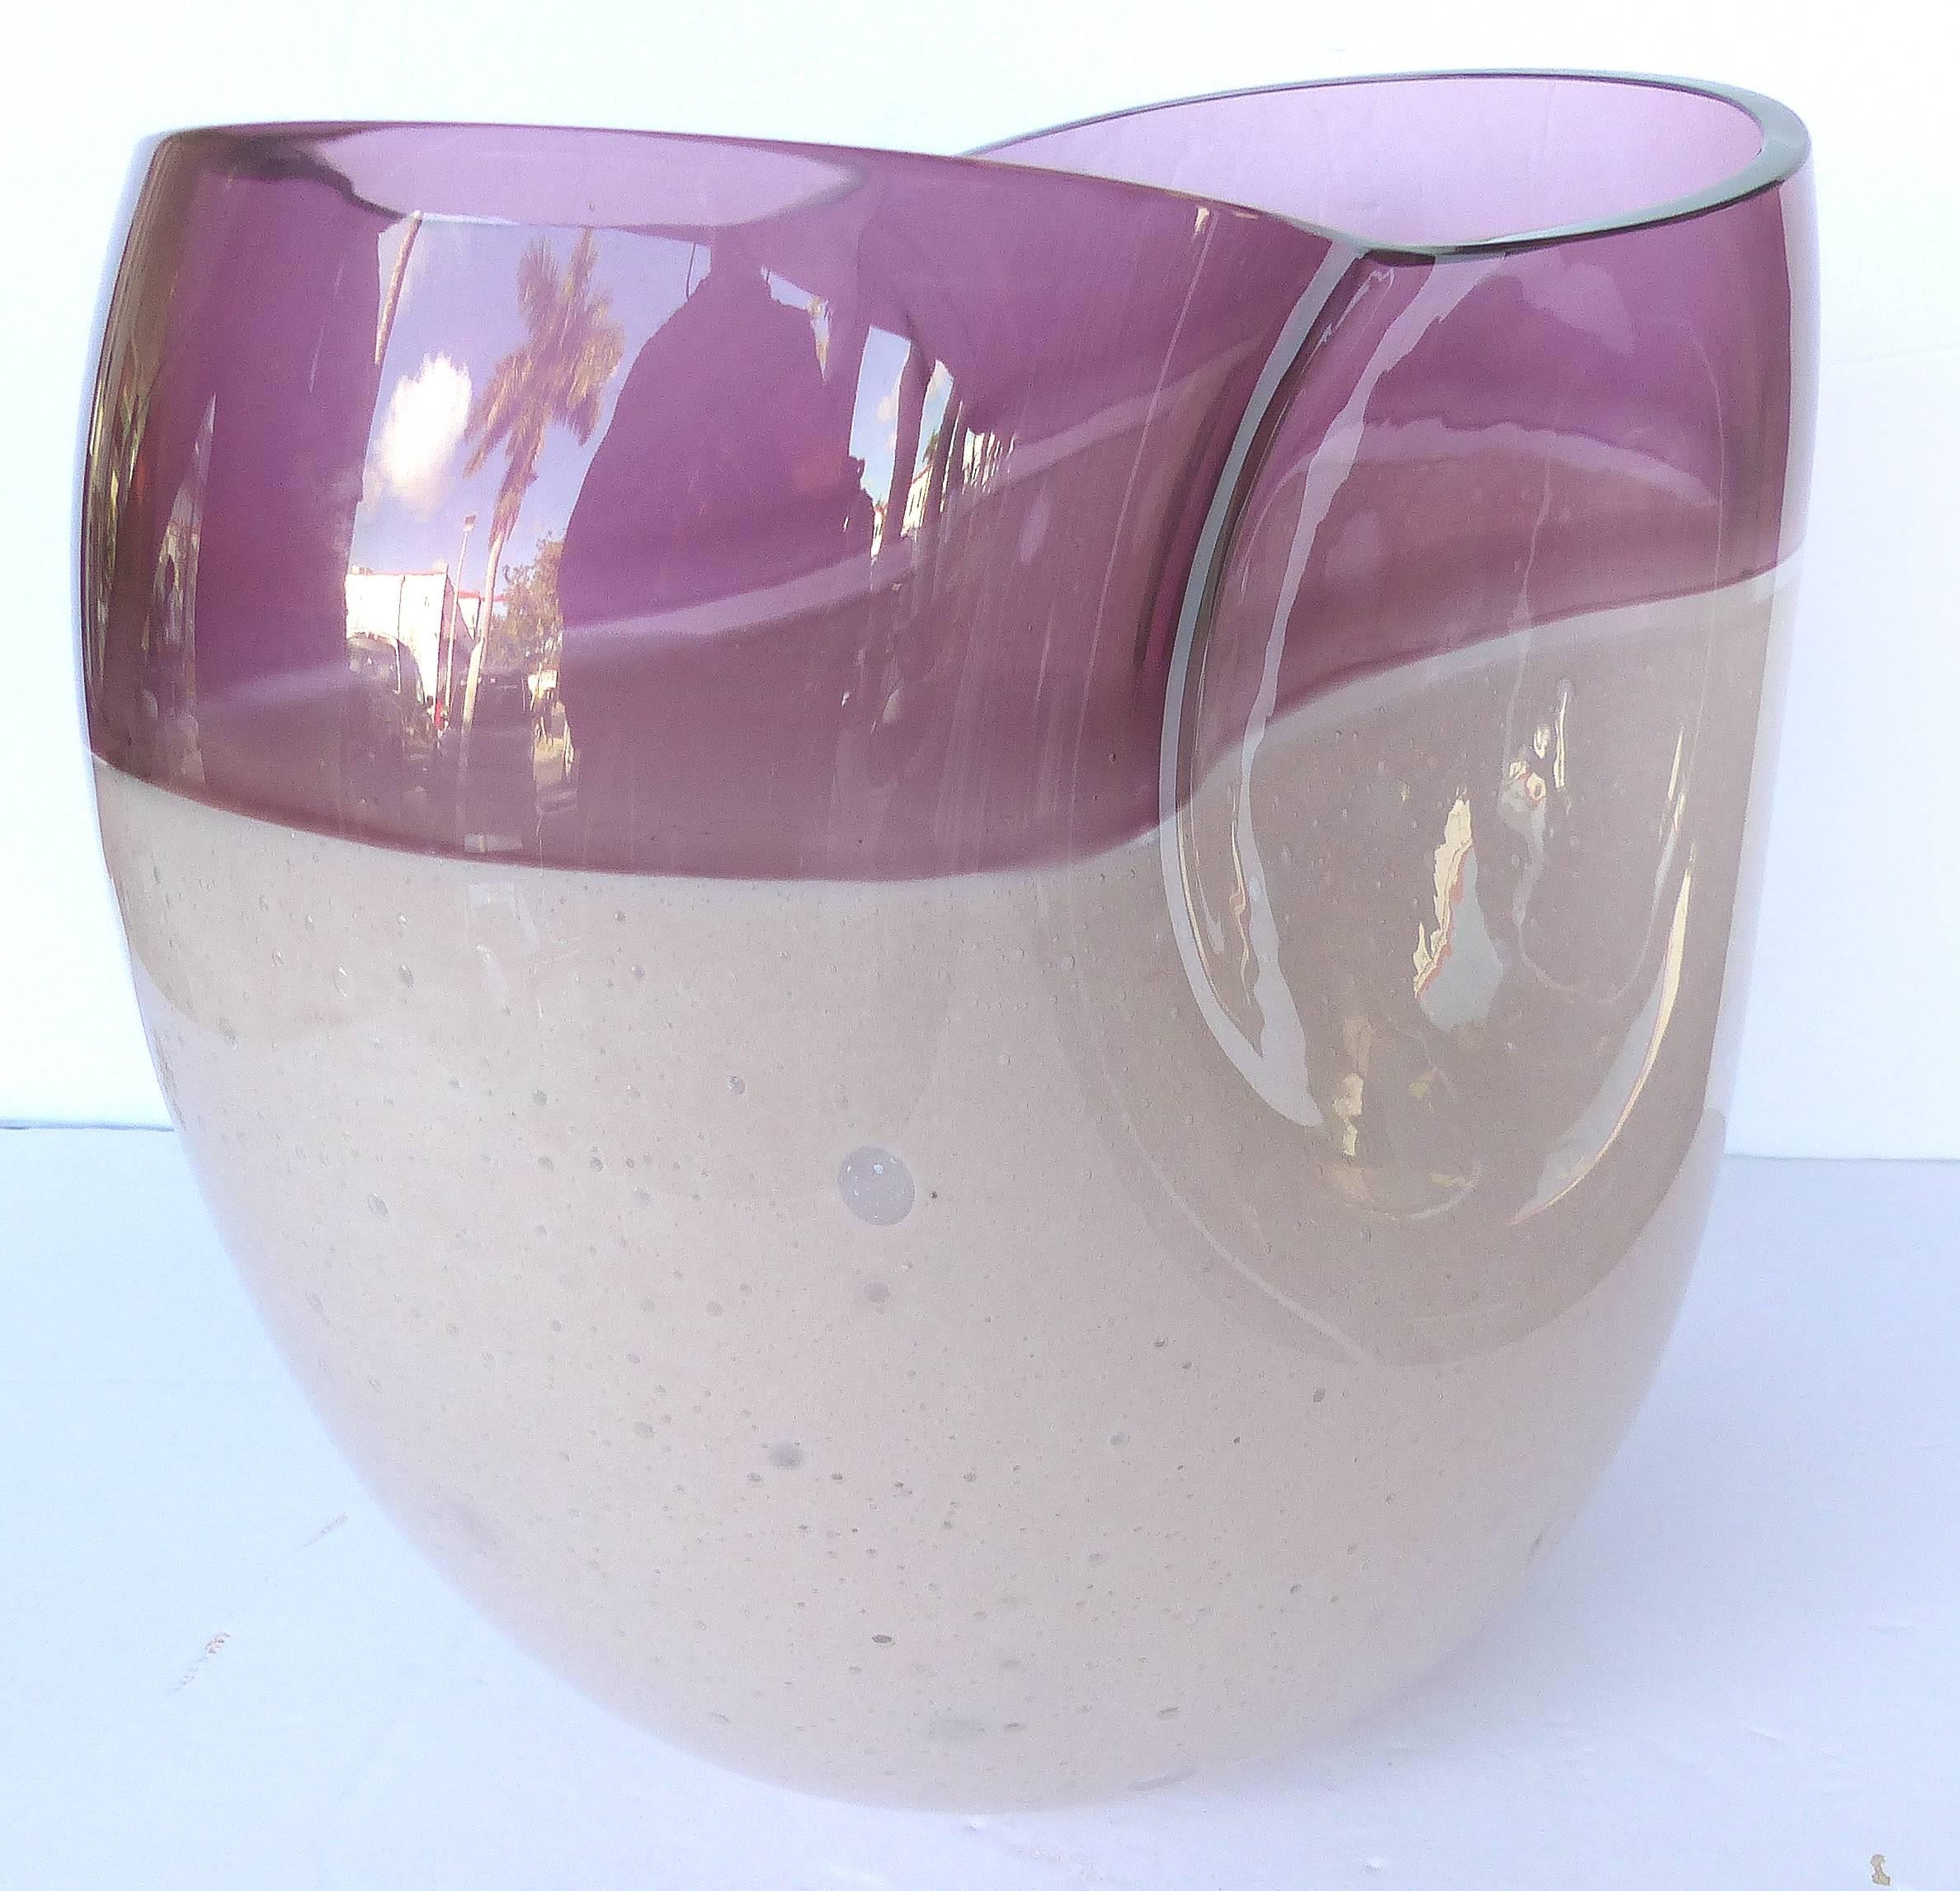 Alfredo Barbini Oggetti Large Blown Art Glass Vase, Signed, Numbered 76

Offered for sale is a large handblown pinched vase with great movement by Alfredo Barbini for Oggetti. The vase is signed and numbered 